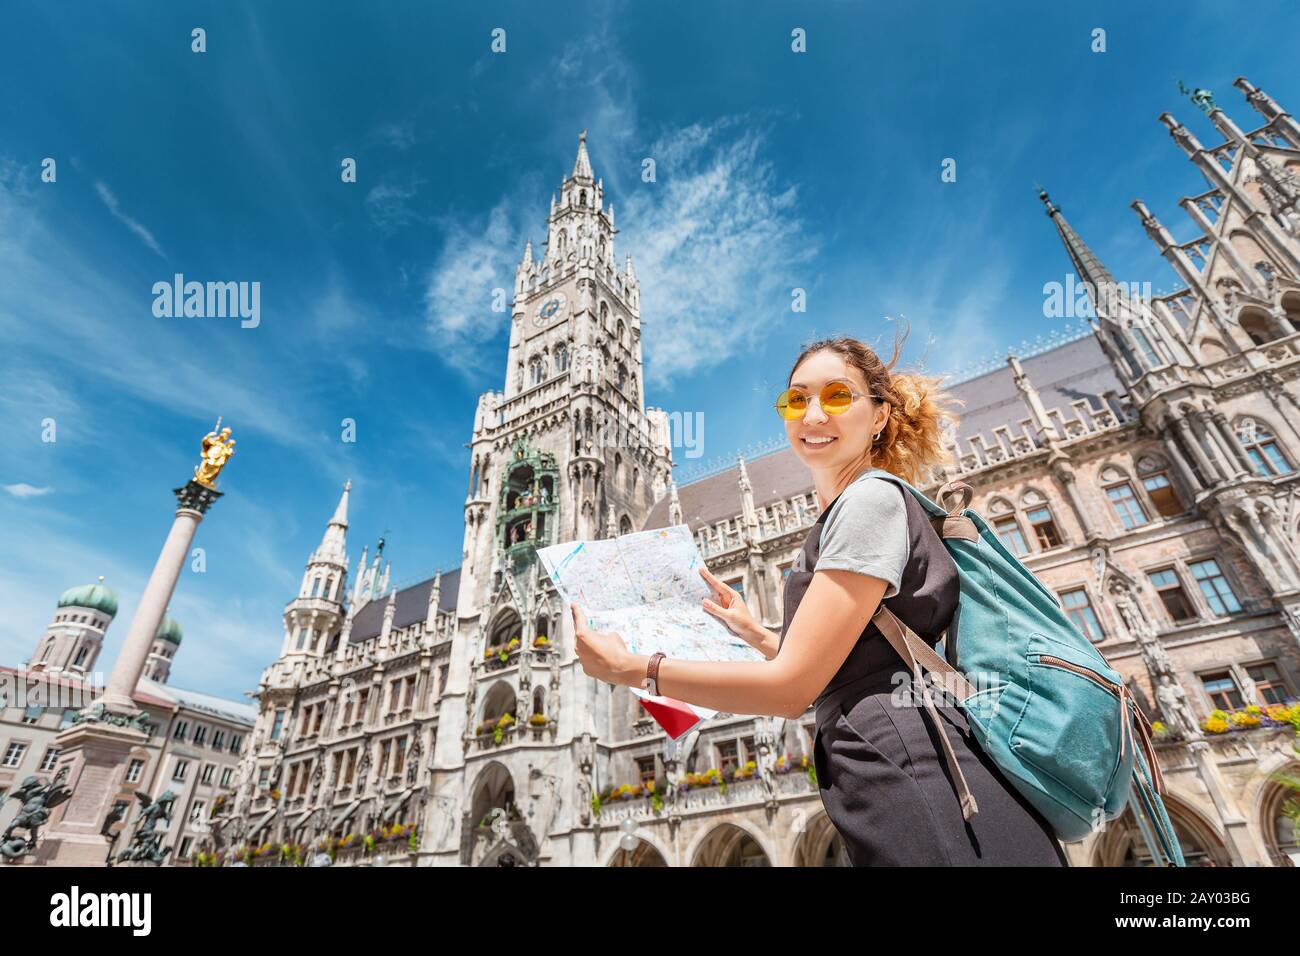 Happy asian woman with map searching for sights and interesting places in Munich city with Town Hall at the background. Stock Photo